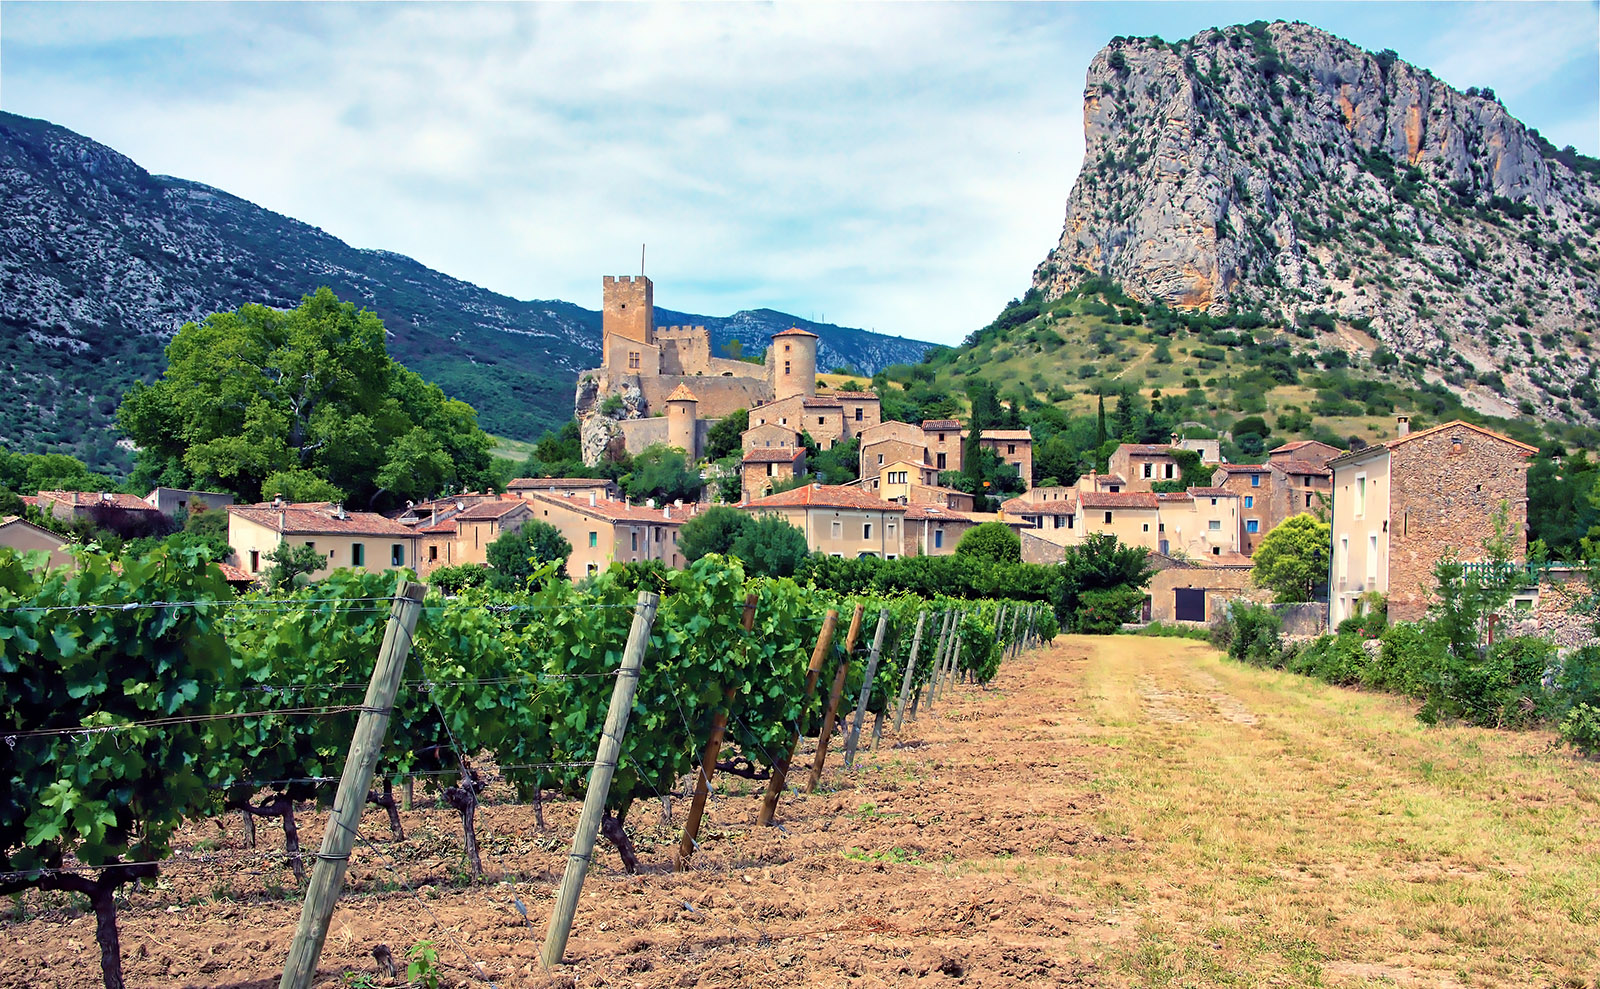 Enjoy a Sinister, Sun-drenched Holiday in the South of France with 'The Vacation'